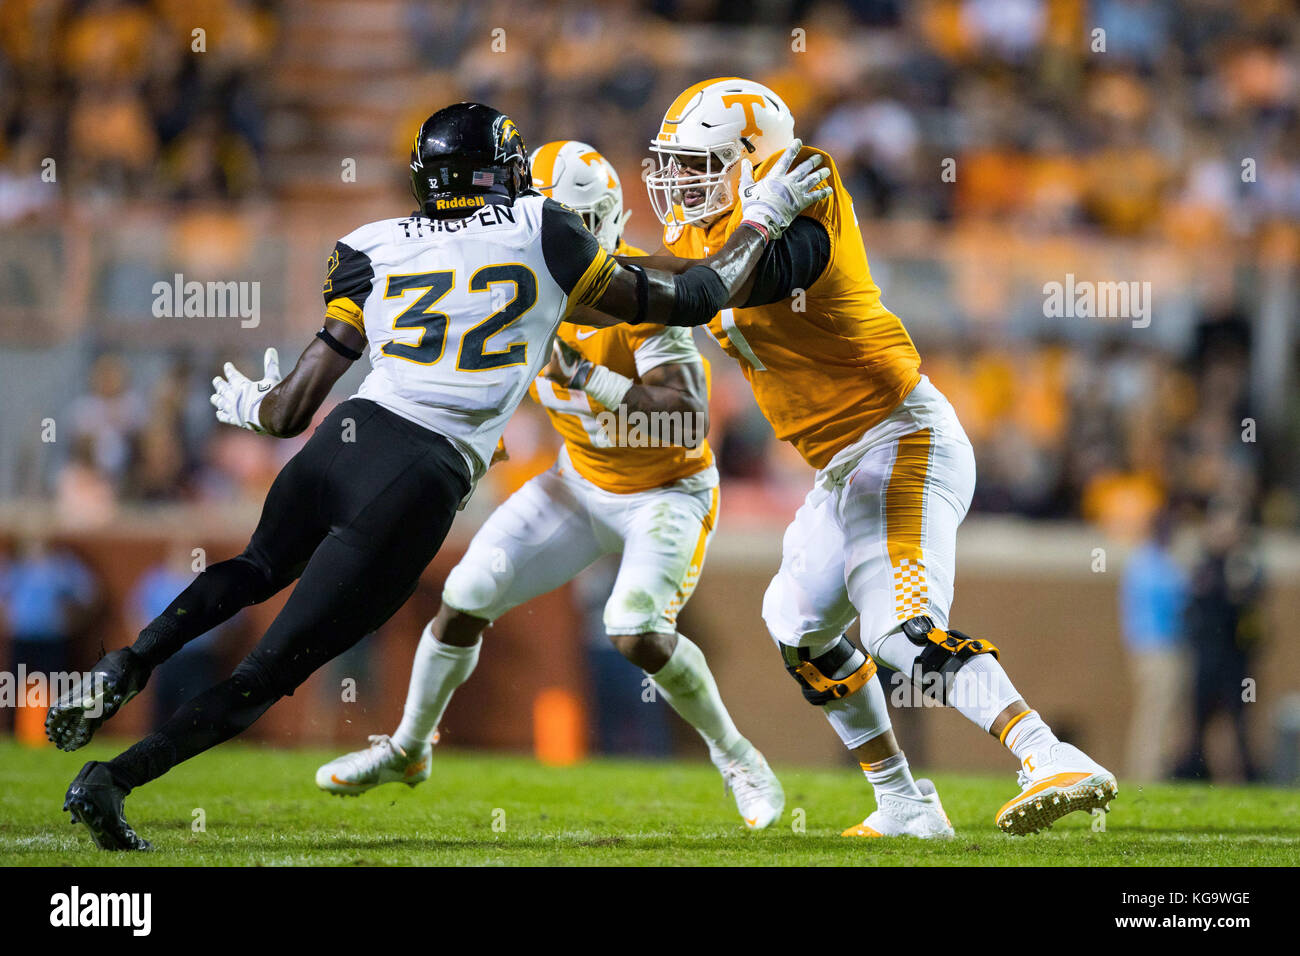 November 4, 2017: Devante Brooks #77 of the Tennessee Volunteers blocks Xavier Thigpen #32 of the Southern Miss Golden Eagles during the NCAA Football game between the University of Tennessee Volunteers and the University of Southern Mississippi Golden Eagles at Neyland Stadium in Knoxville, TN Tim Gangloff/CSM Stock Photo